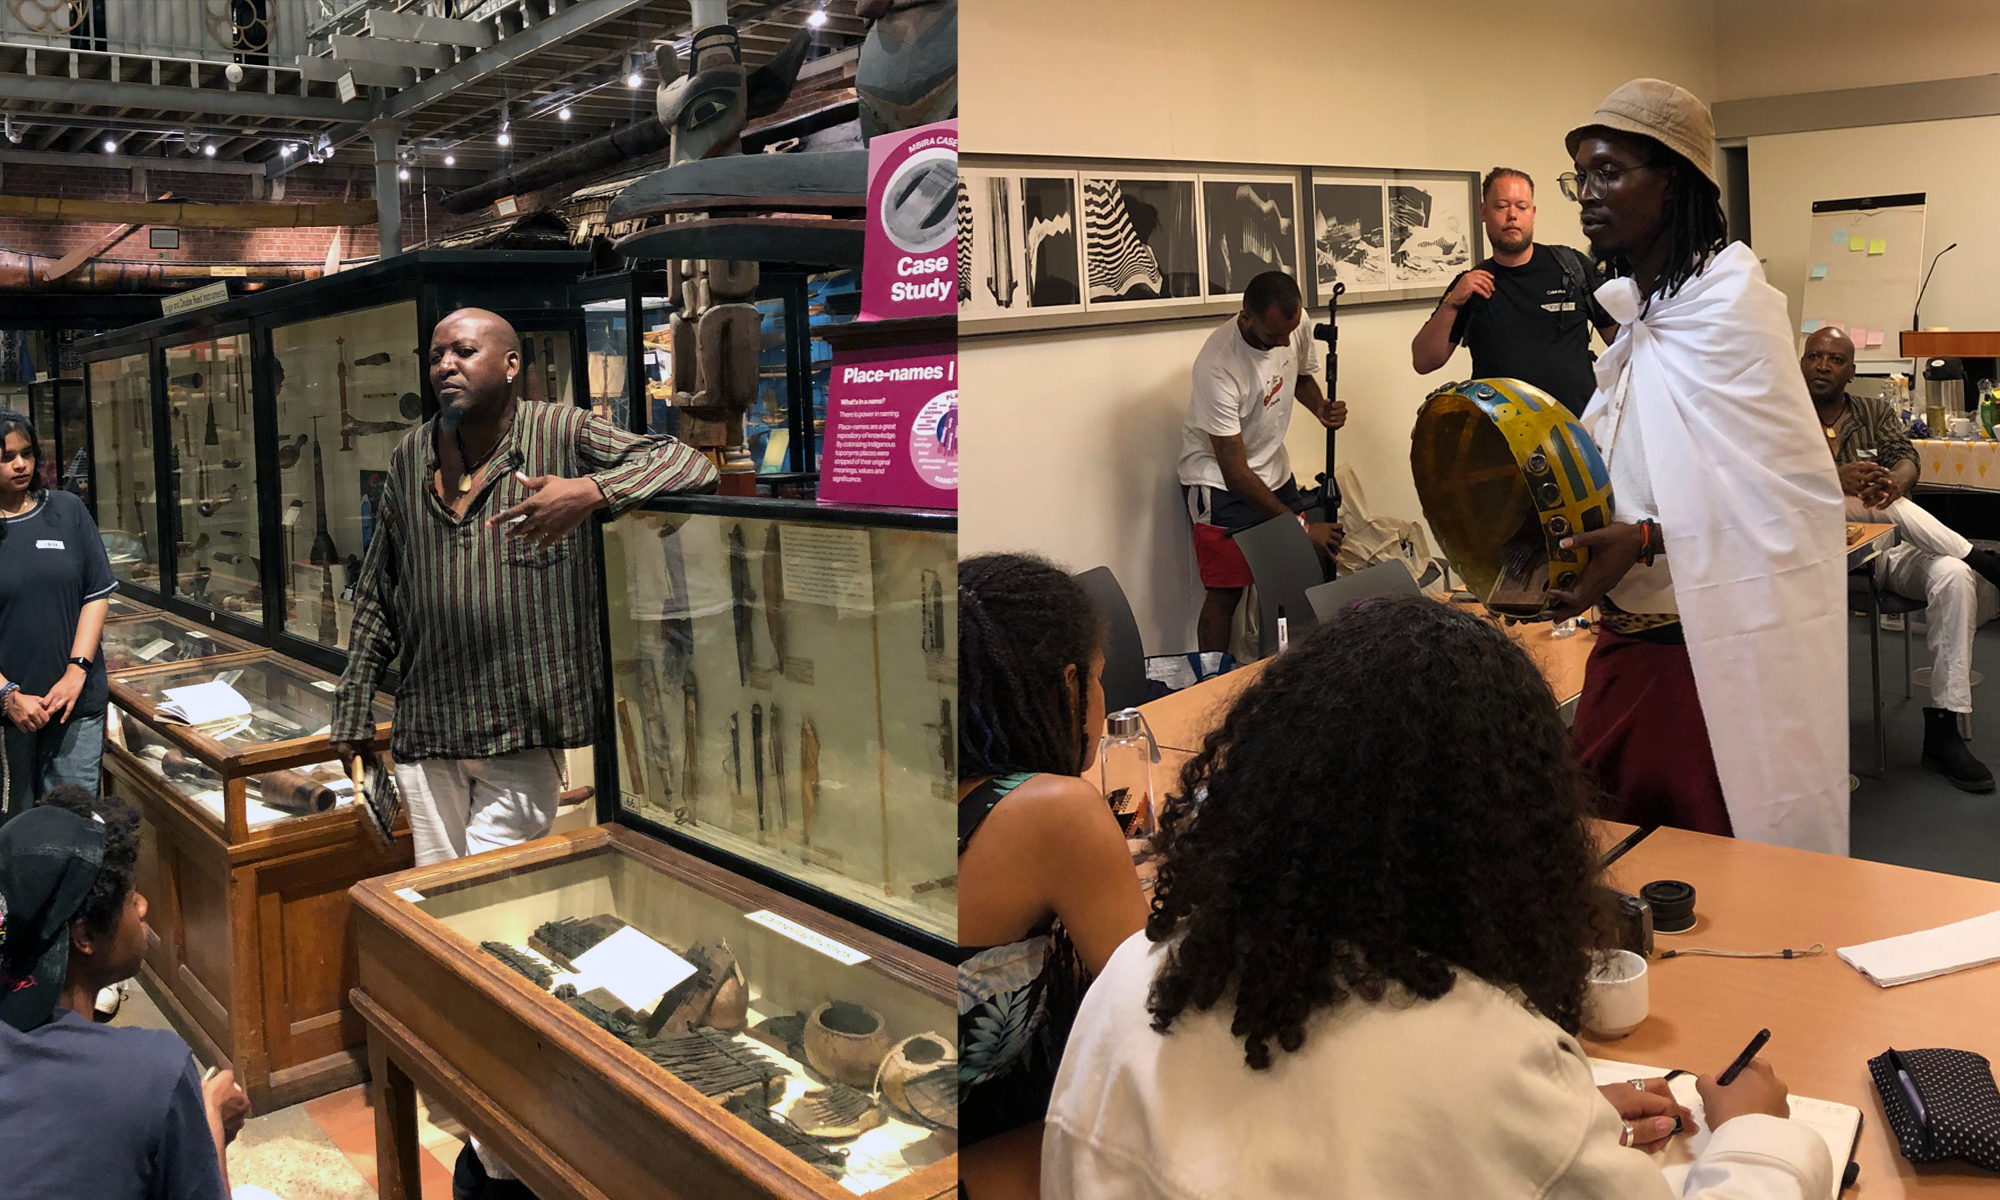 Split image showing people gathered around display cases full of mbiras, and a view in a room with people sat at tables with a person playing a mbira instrument 